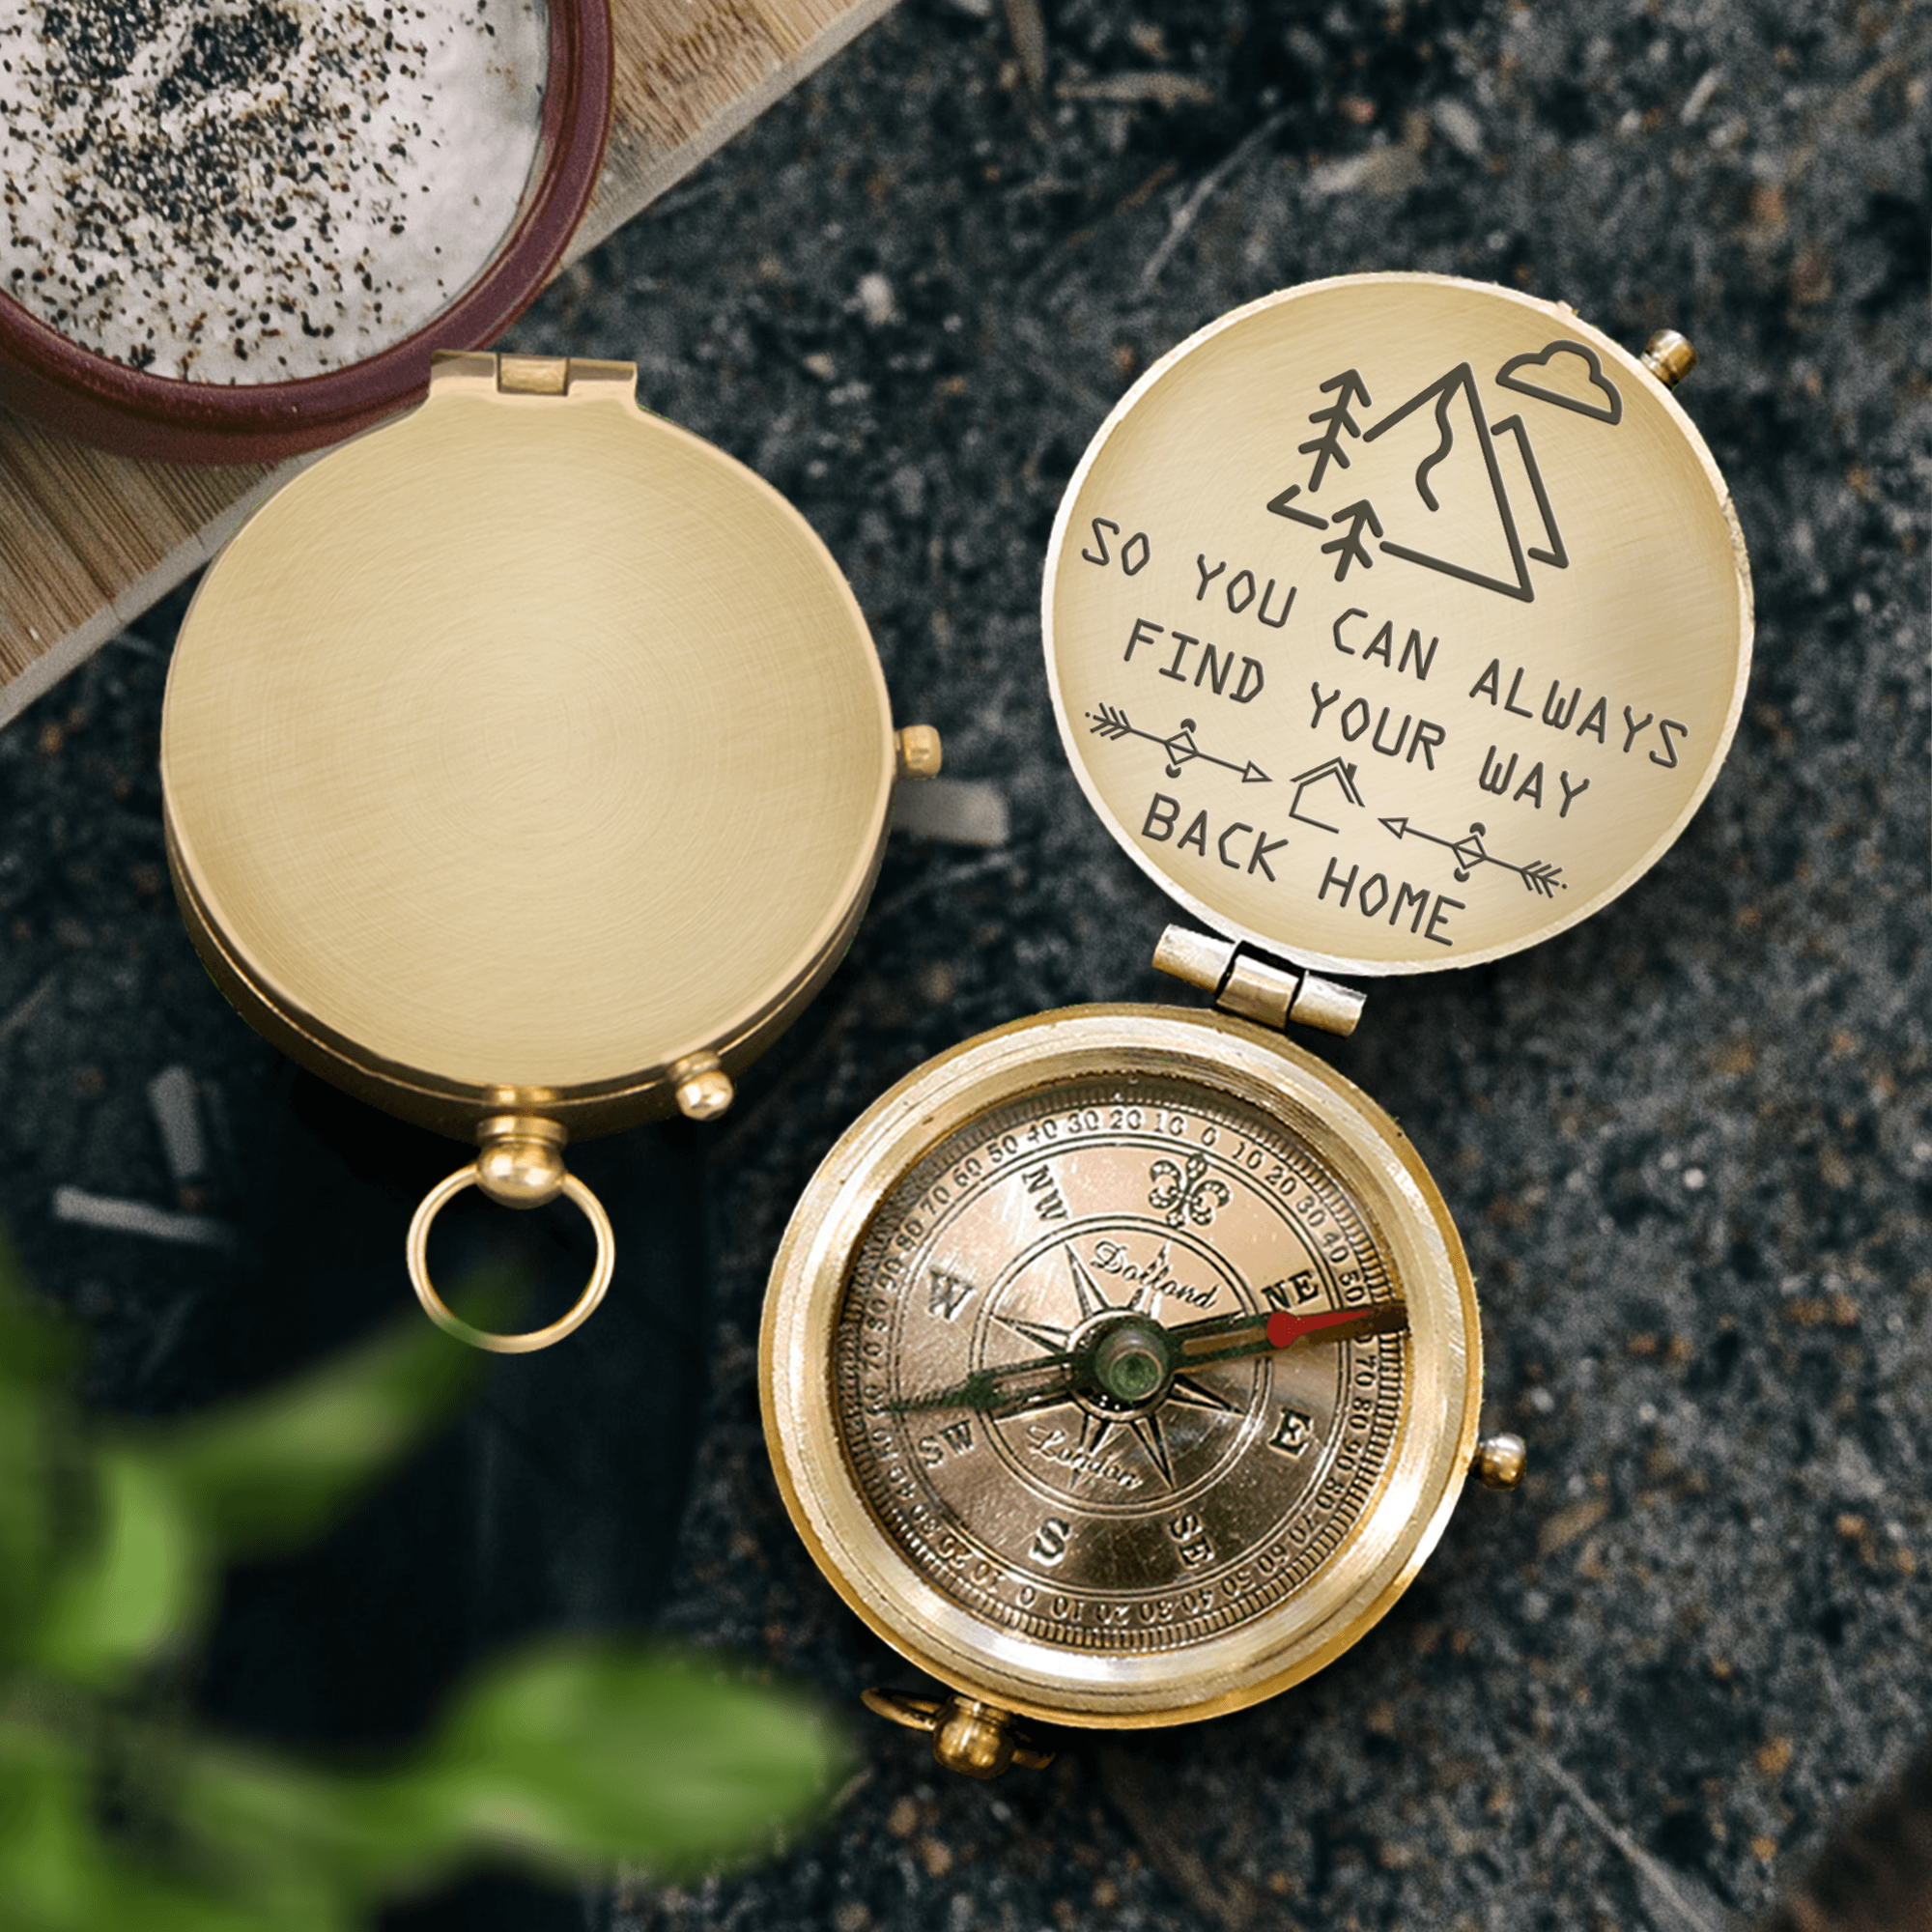 Engraved Compass - Hiking - To My Man - So You Can Always Find Your Way Back Home - Augpb26033 - Gifts Holder